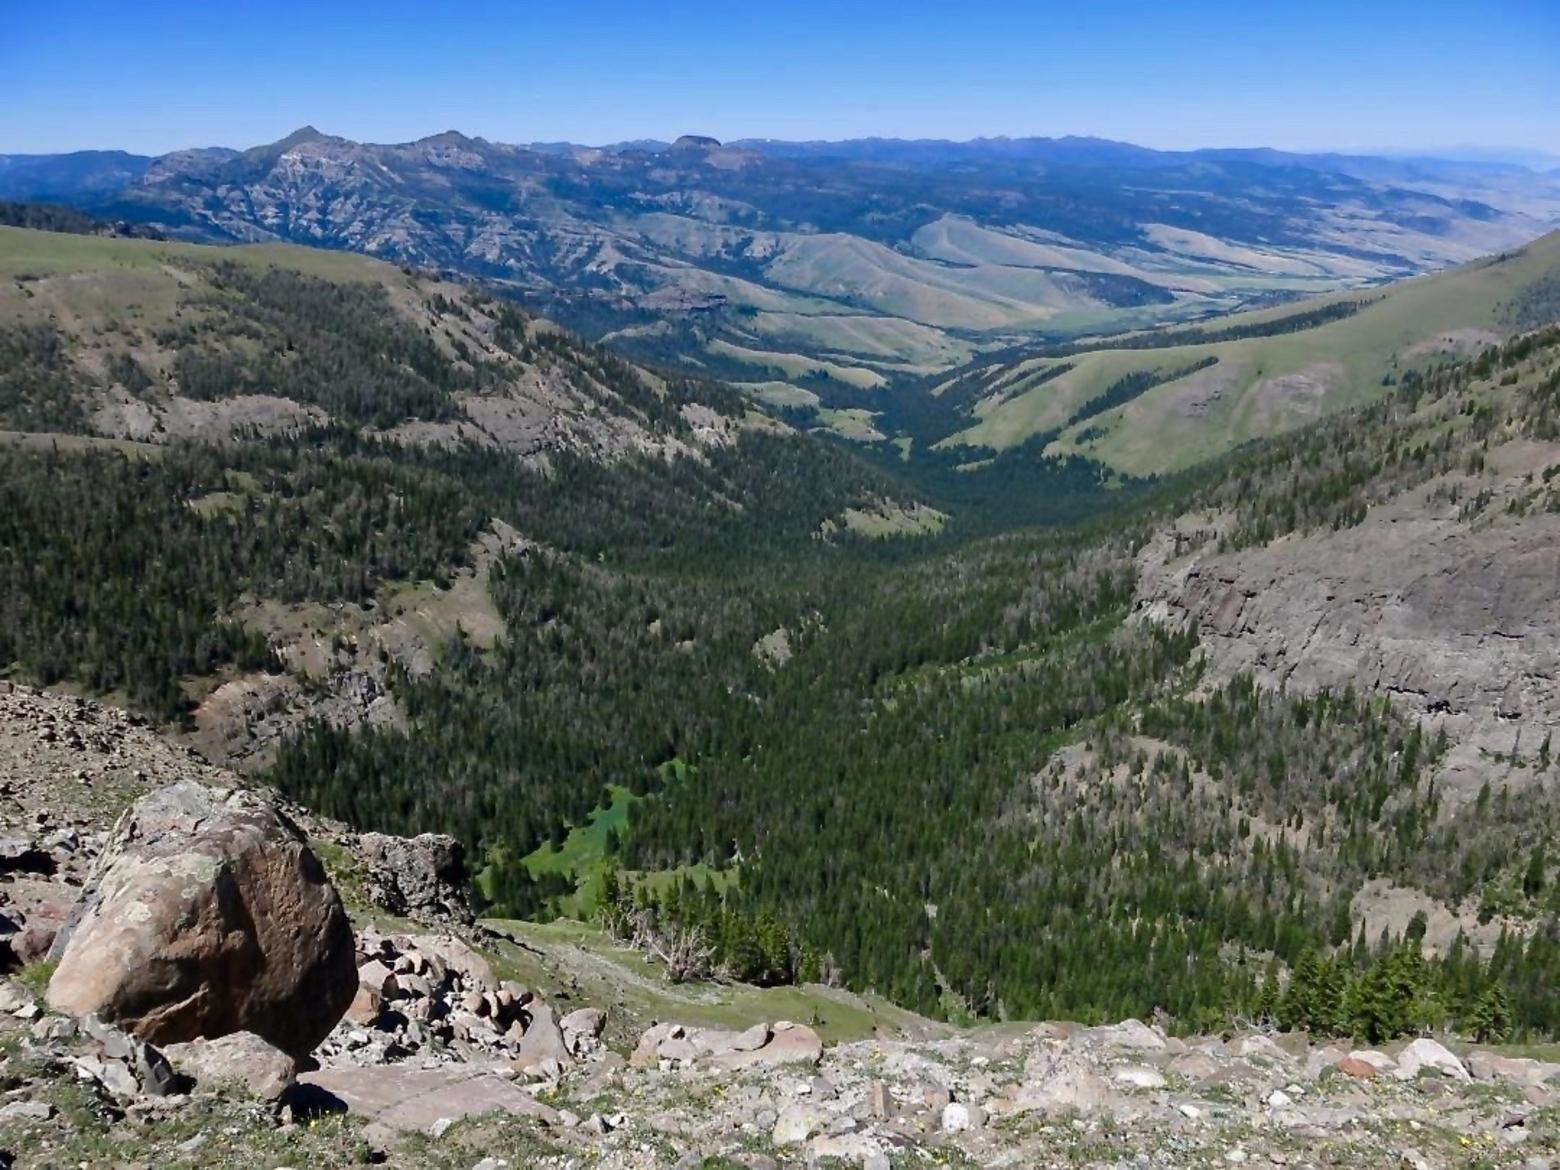 The Gallatin Range is home to a greater complement of large mammals than every national park in the Lower 48 states, except for Yellowstone, Grand Teton and Glacier.  While scientists and conservationists have called for their protection for a century, they have remained vulnerable, especially during the era when they were checkerboarded with private tracts owned by the Northern Pacific Railroad and timber baron Tim Blixseth. Miraculously, because the land remains intact, so does the wildlife. Many say how much land gets protected is the most important question facing the core of Greater Yellowstone in decades. 